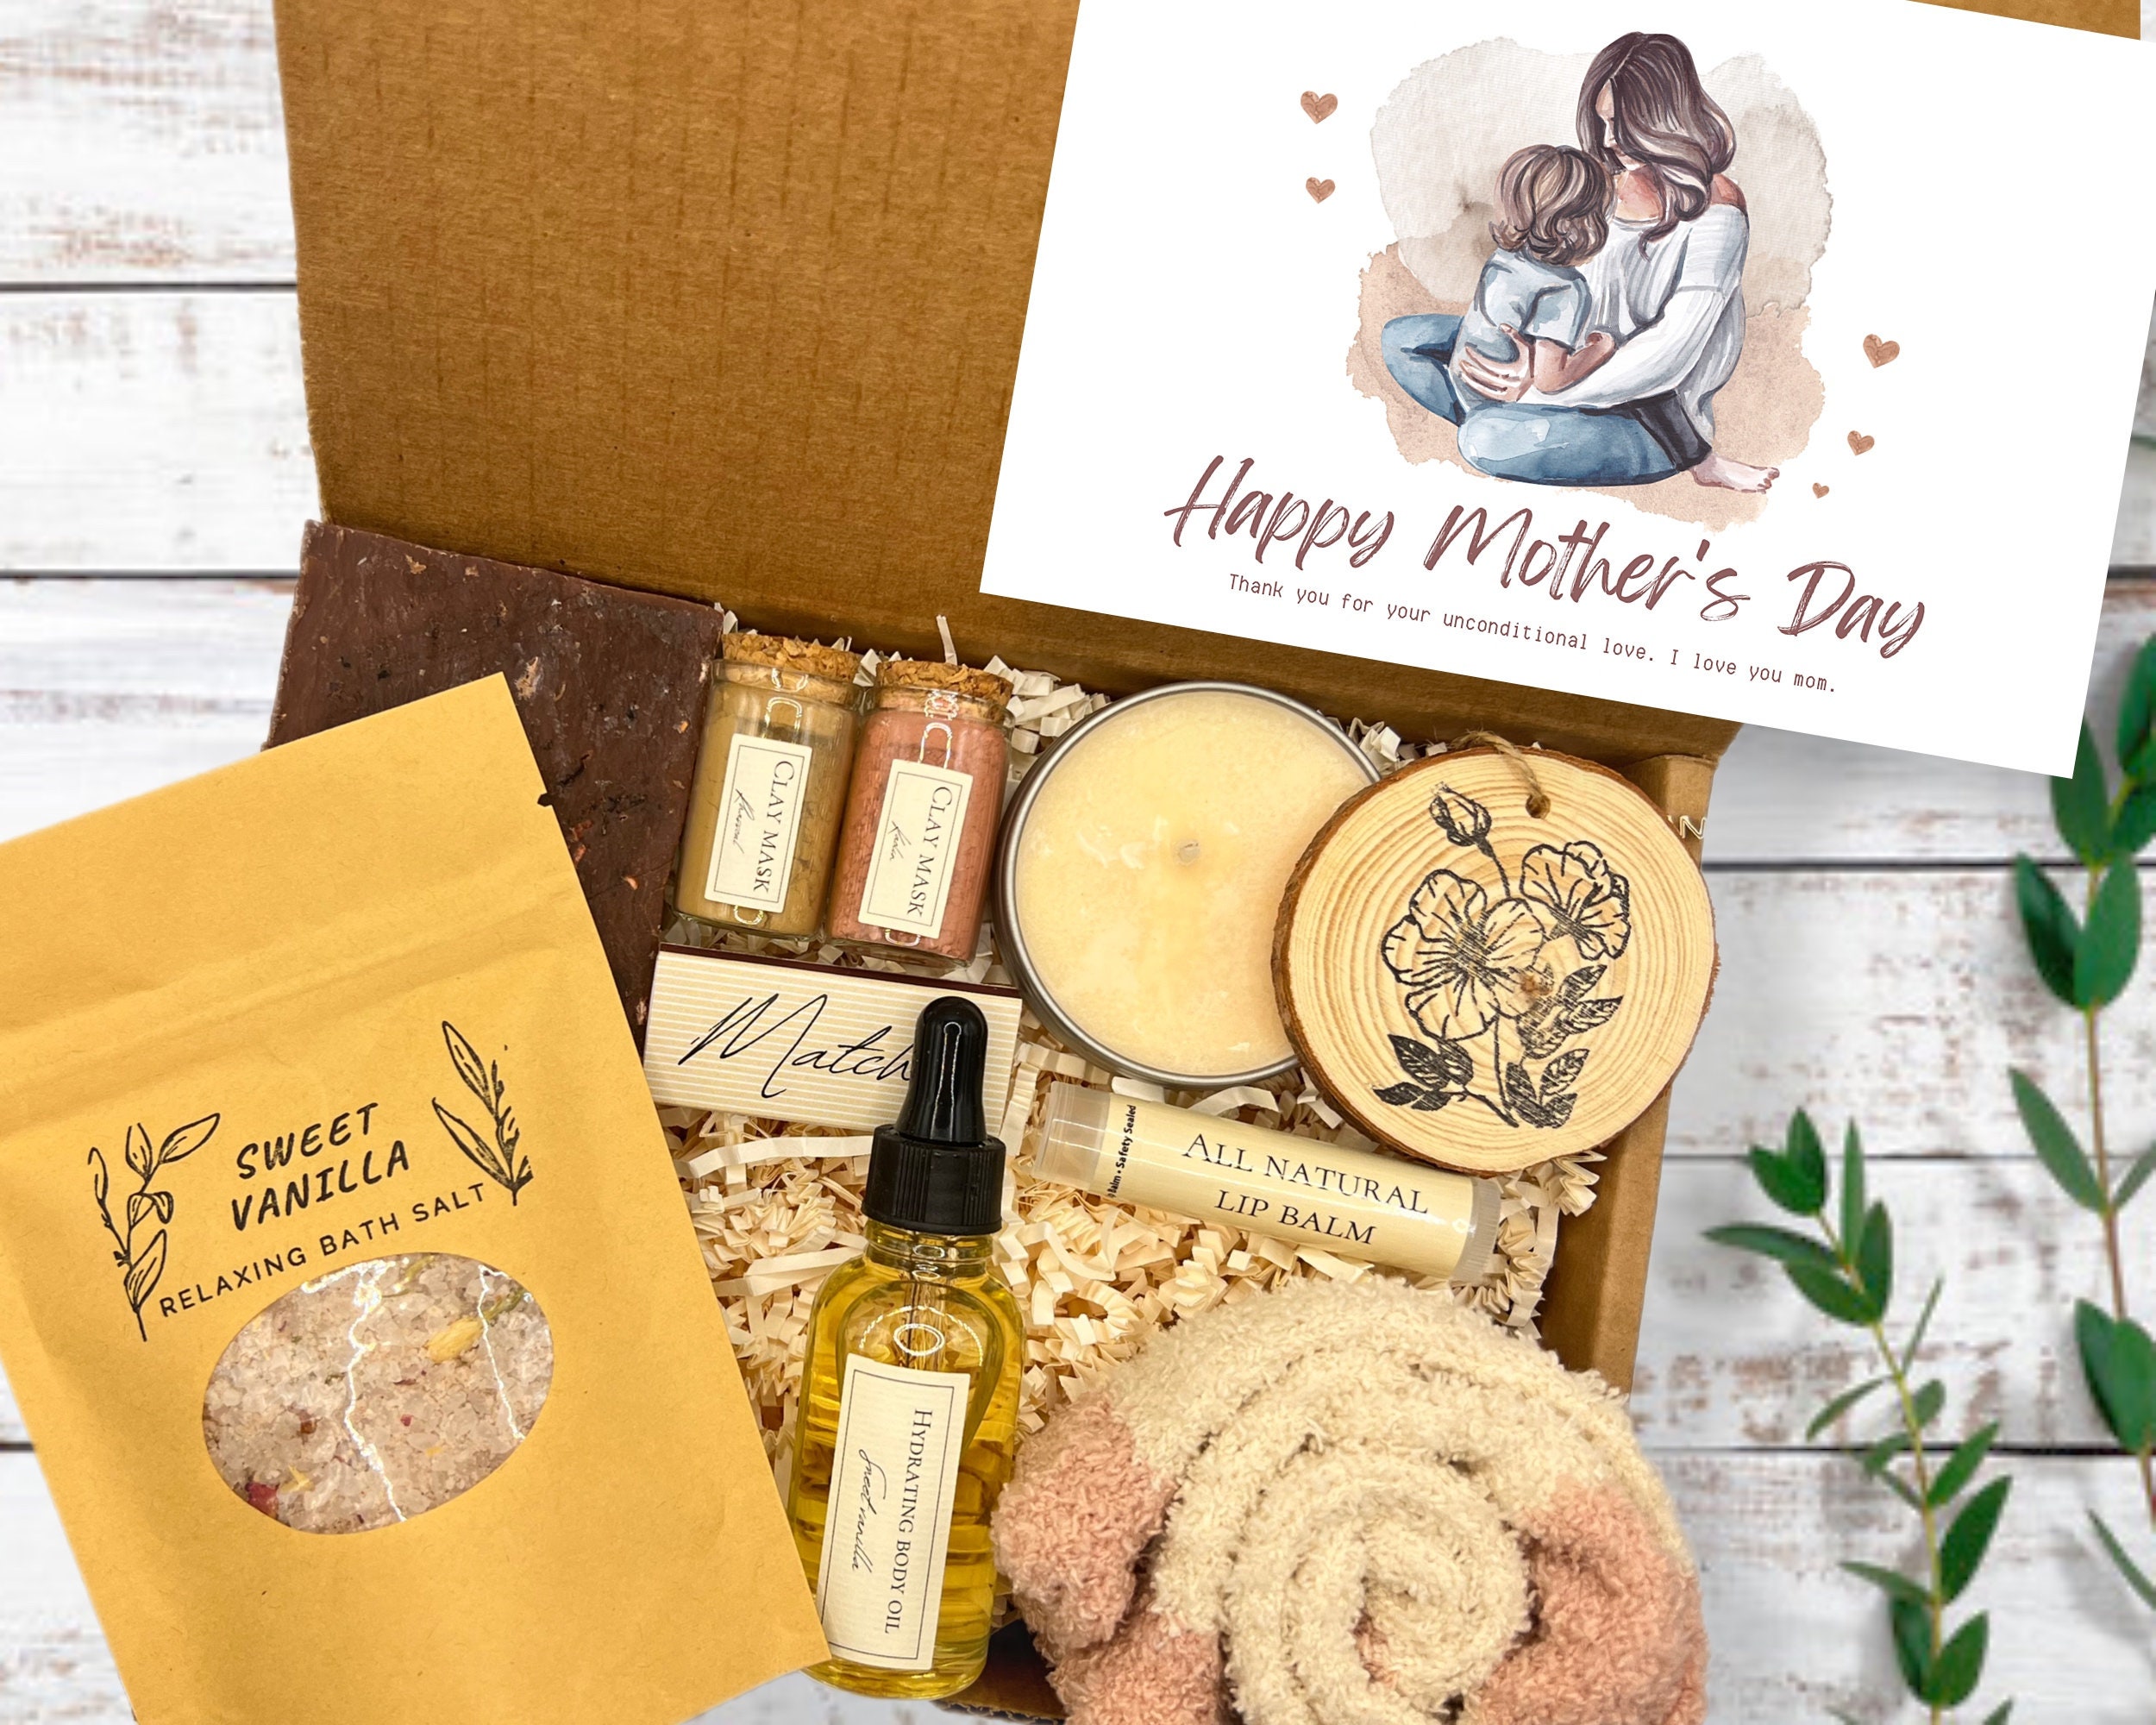 Mothers Day Gift Box for Mom, Best Personalized Gifts Basket for Her,  Birthday Gifts for Best Friend, Spa Gift Set for Women - BDGF015